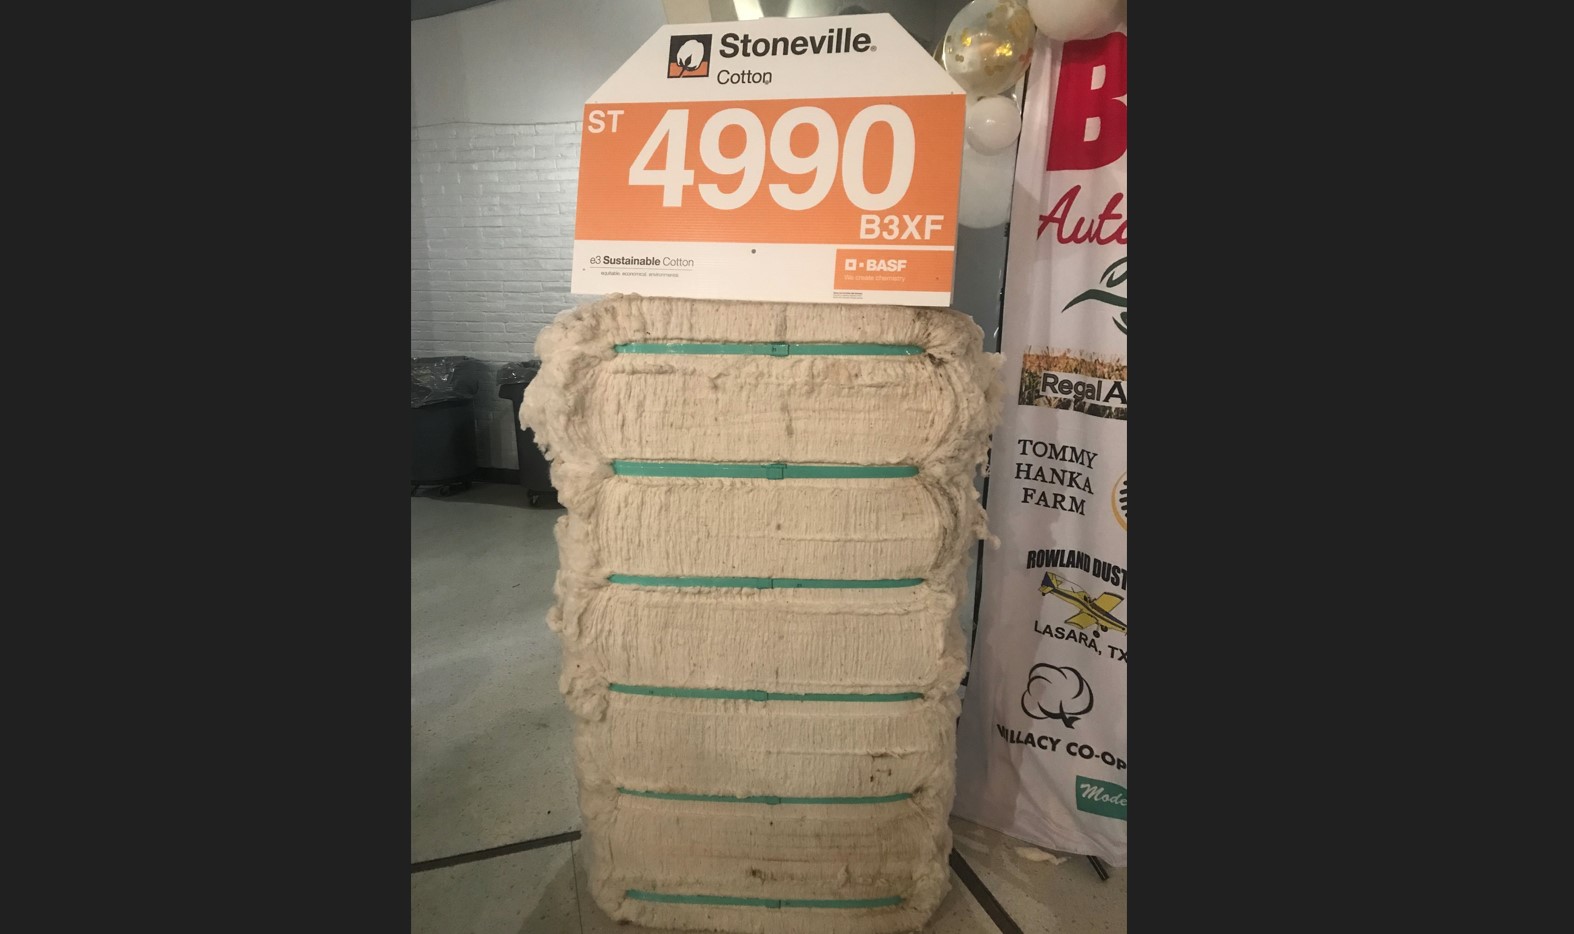 BASF's First Bale of Cotton Helps Raise Money for Scholarship